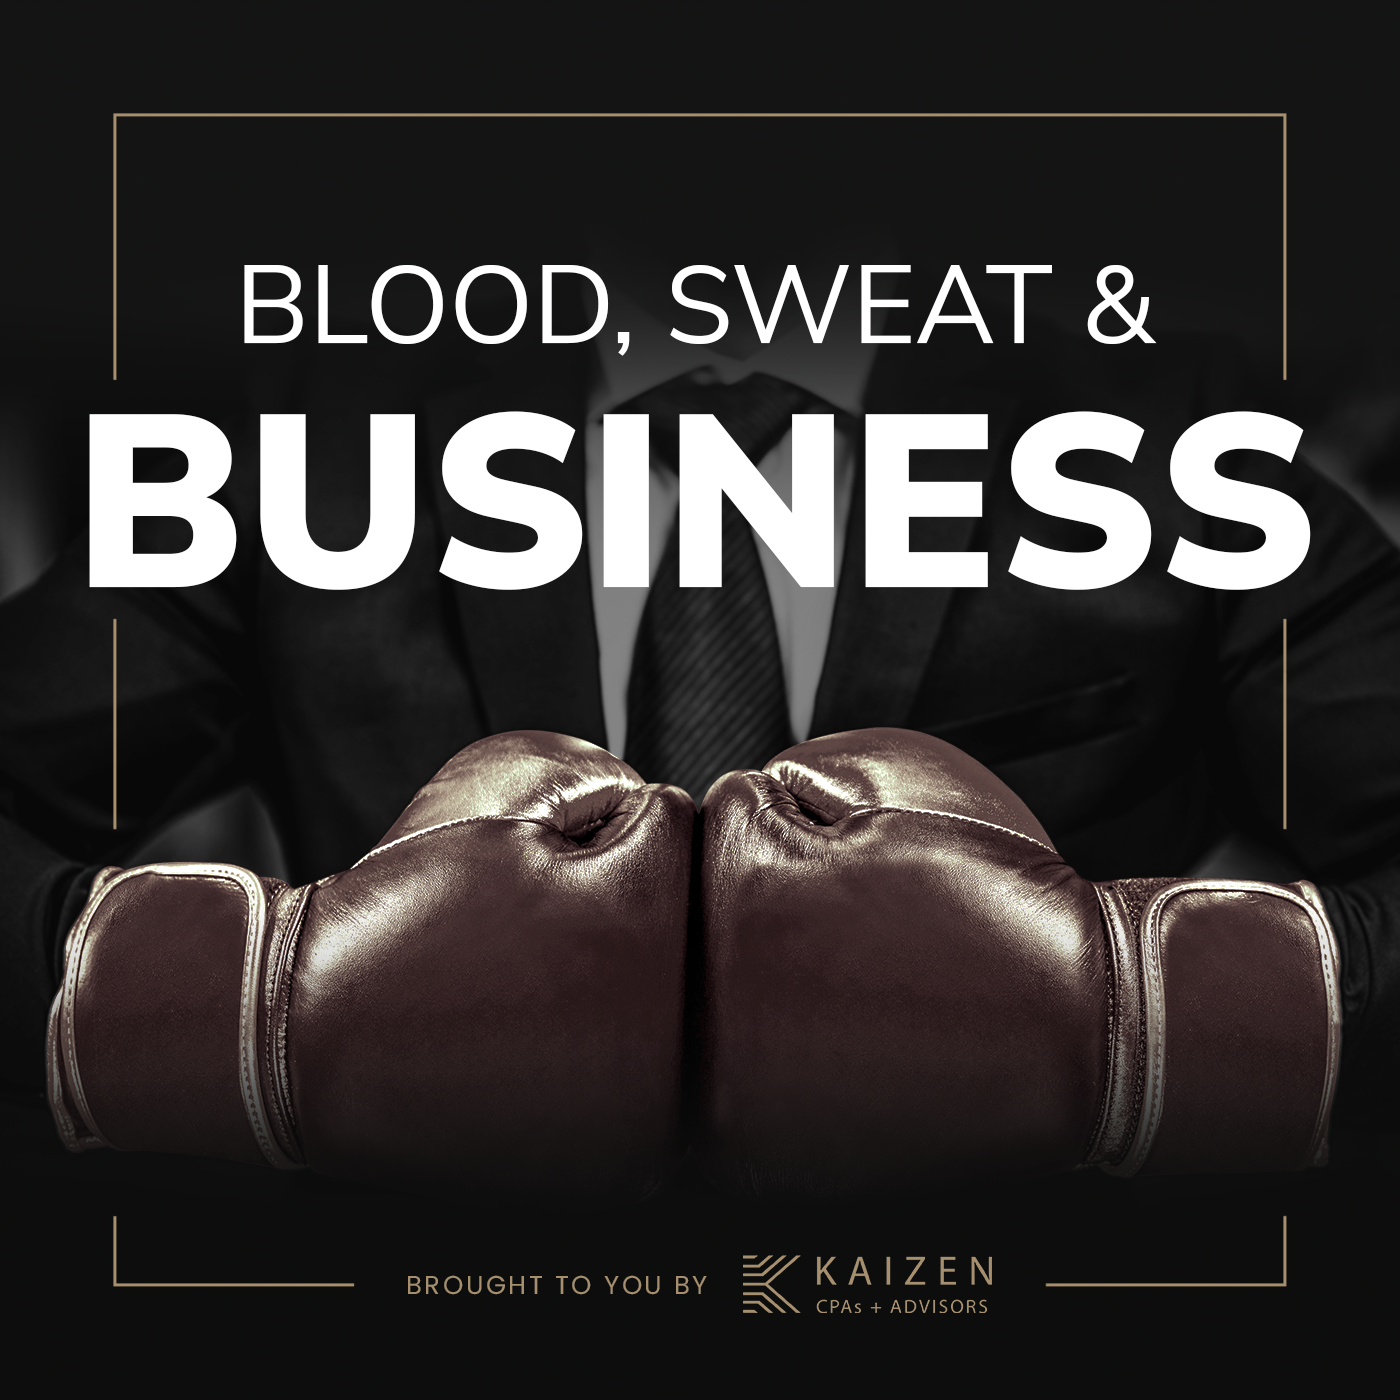 Introducing: Blood, Sweat & Business